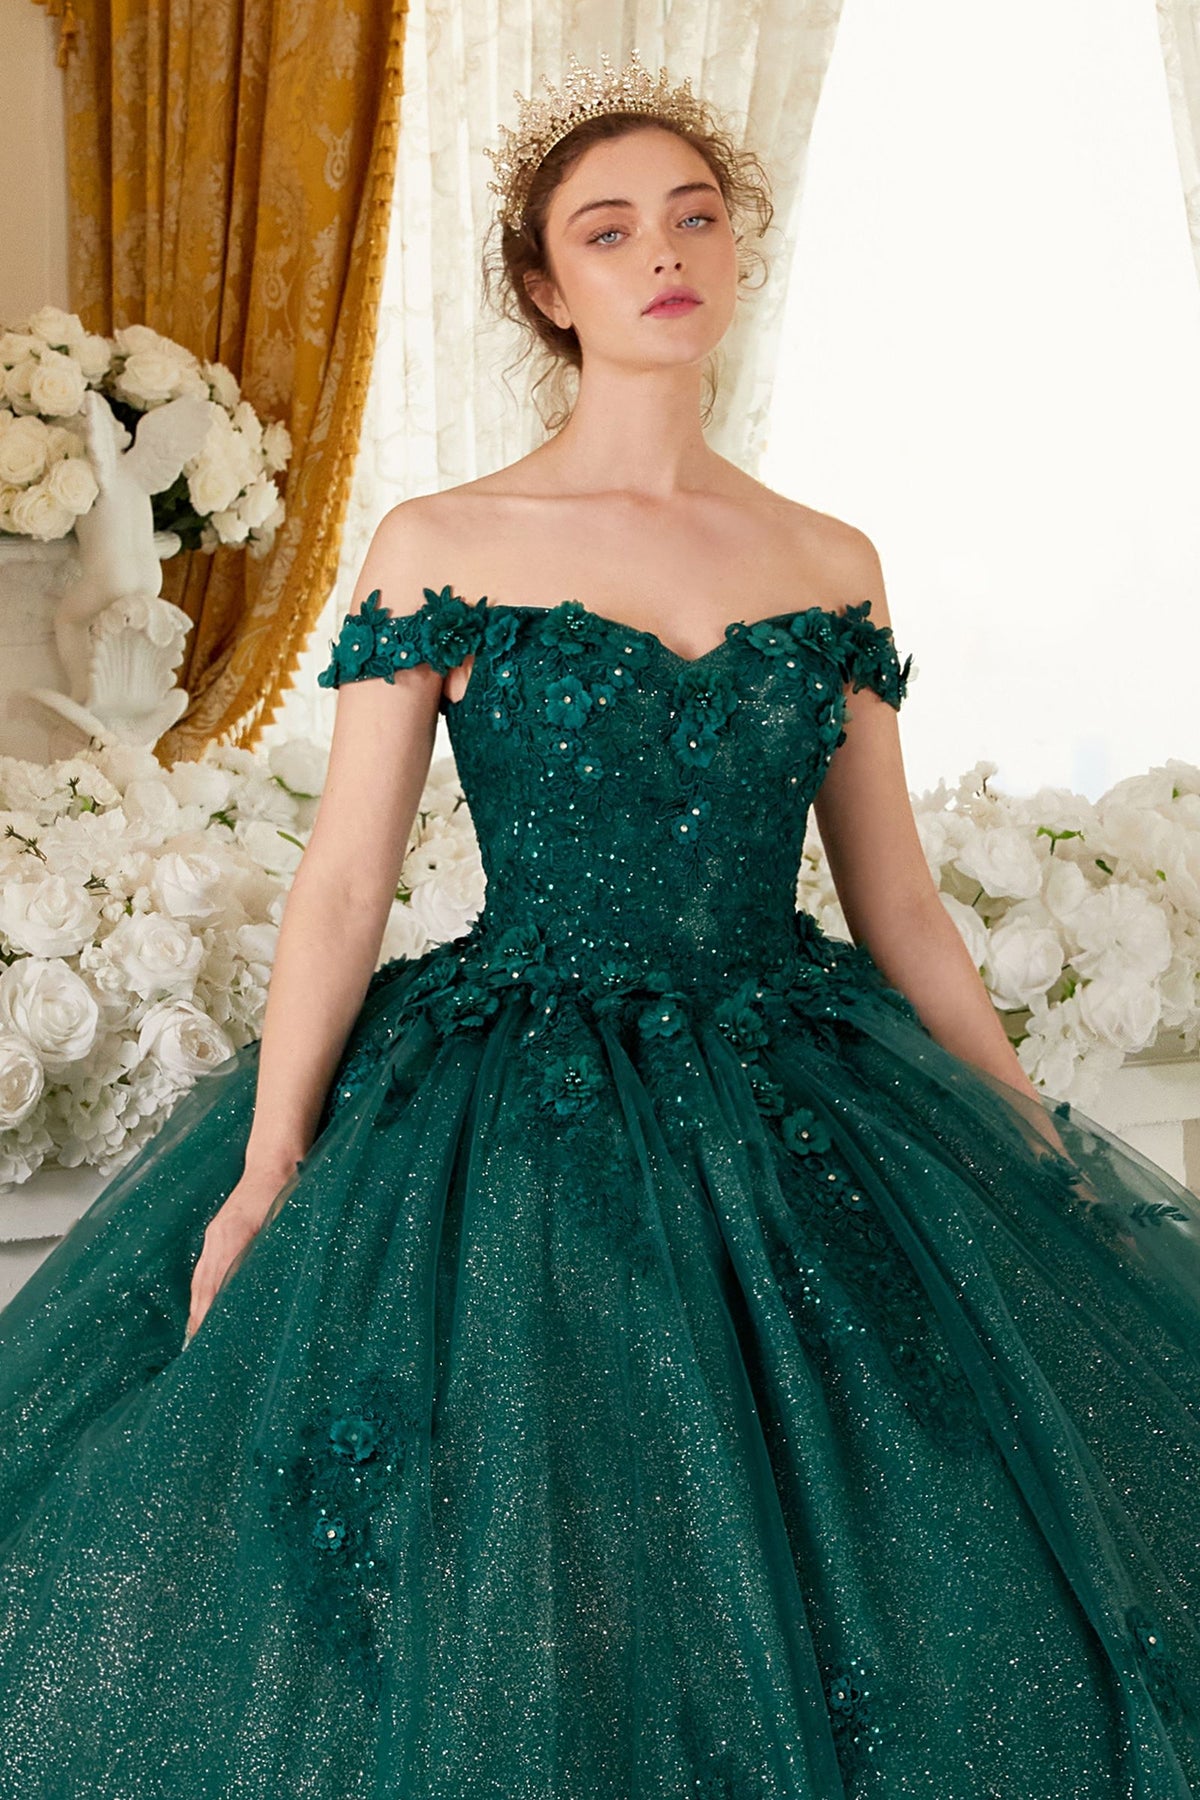 LaDivine by Cinderella Divine - Style 15702 - Off-the-Shoulder Floral Ball Gown, A-Line Silhouette, Sweetheart Bodice, Cap Sleeves, Beaded 3D Floral Appliques. Available at Madeline's Boutique In Boca Raton, Florida. Picture is of the dress in Emerald.